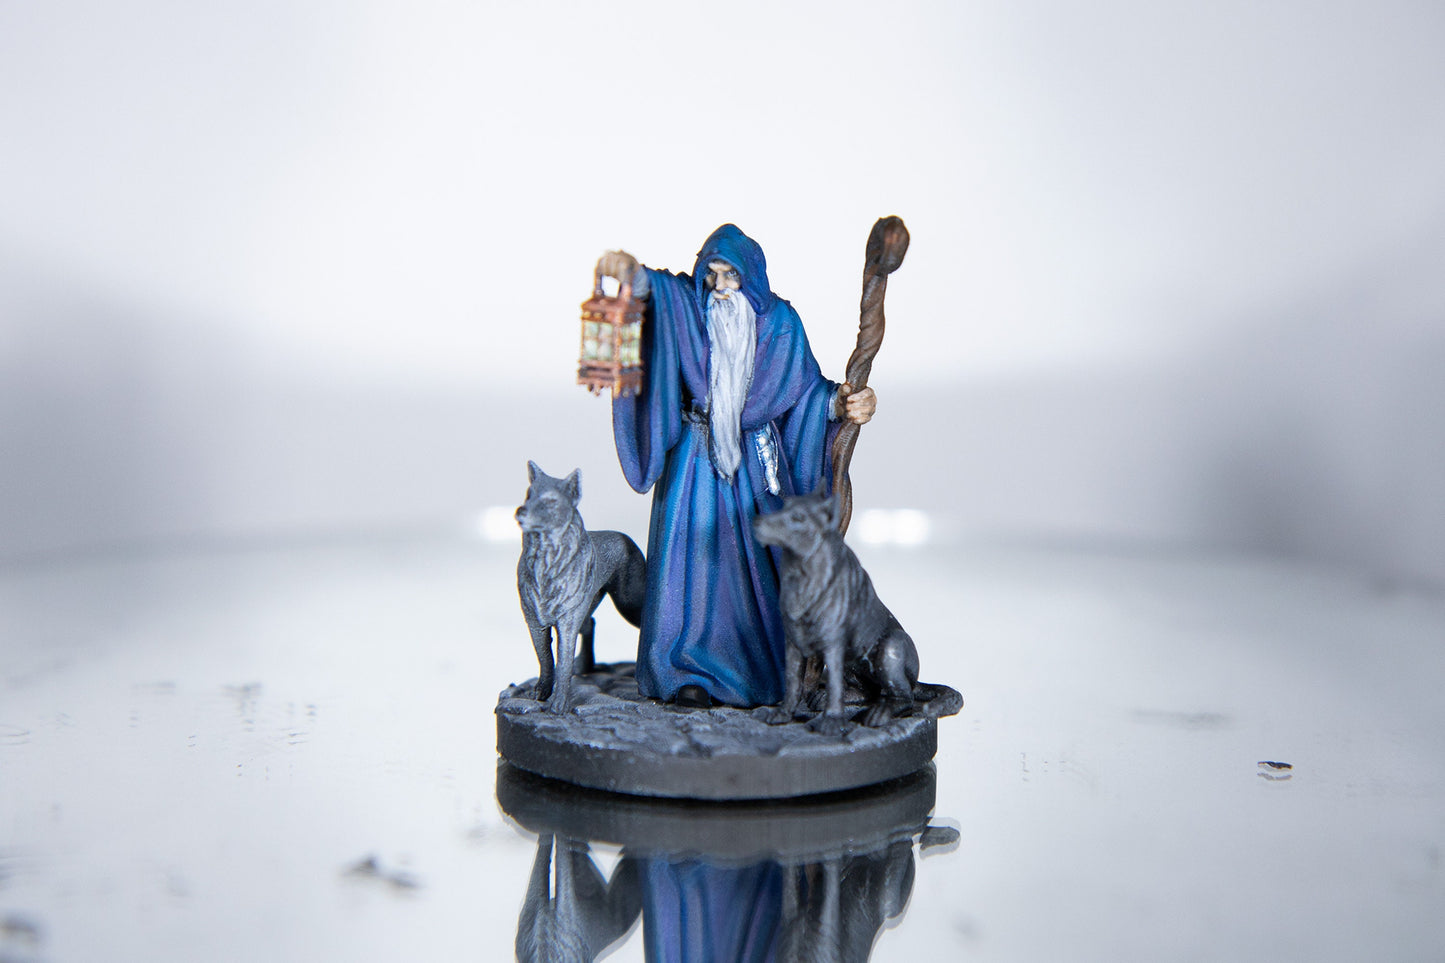 The Hermit - Great Grimoire Printed Miniature | Dungeons & Dragons | Pathfinder | Tabletop